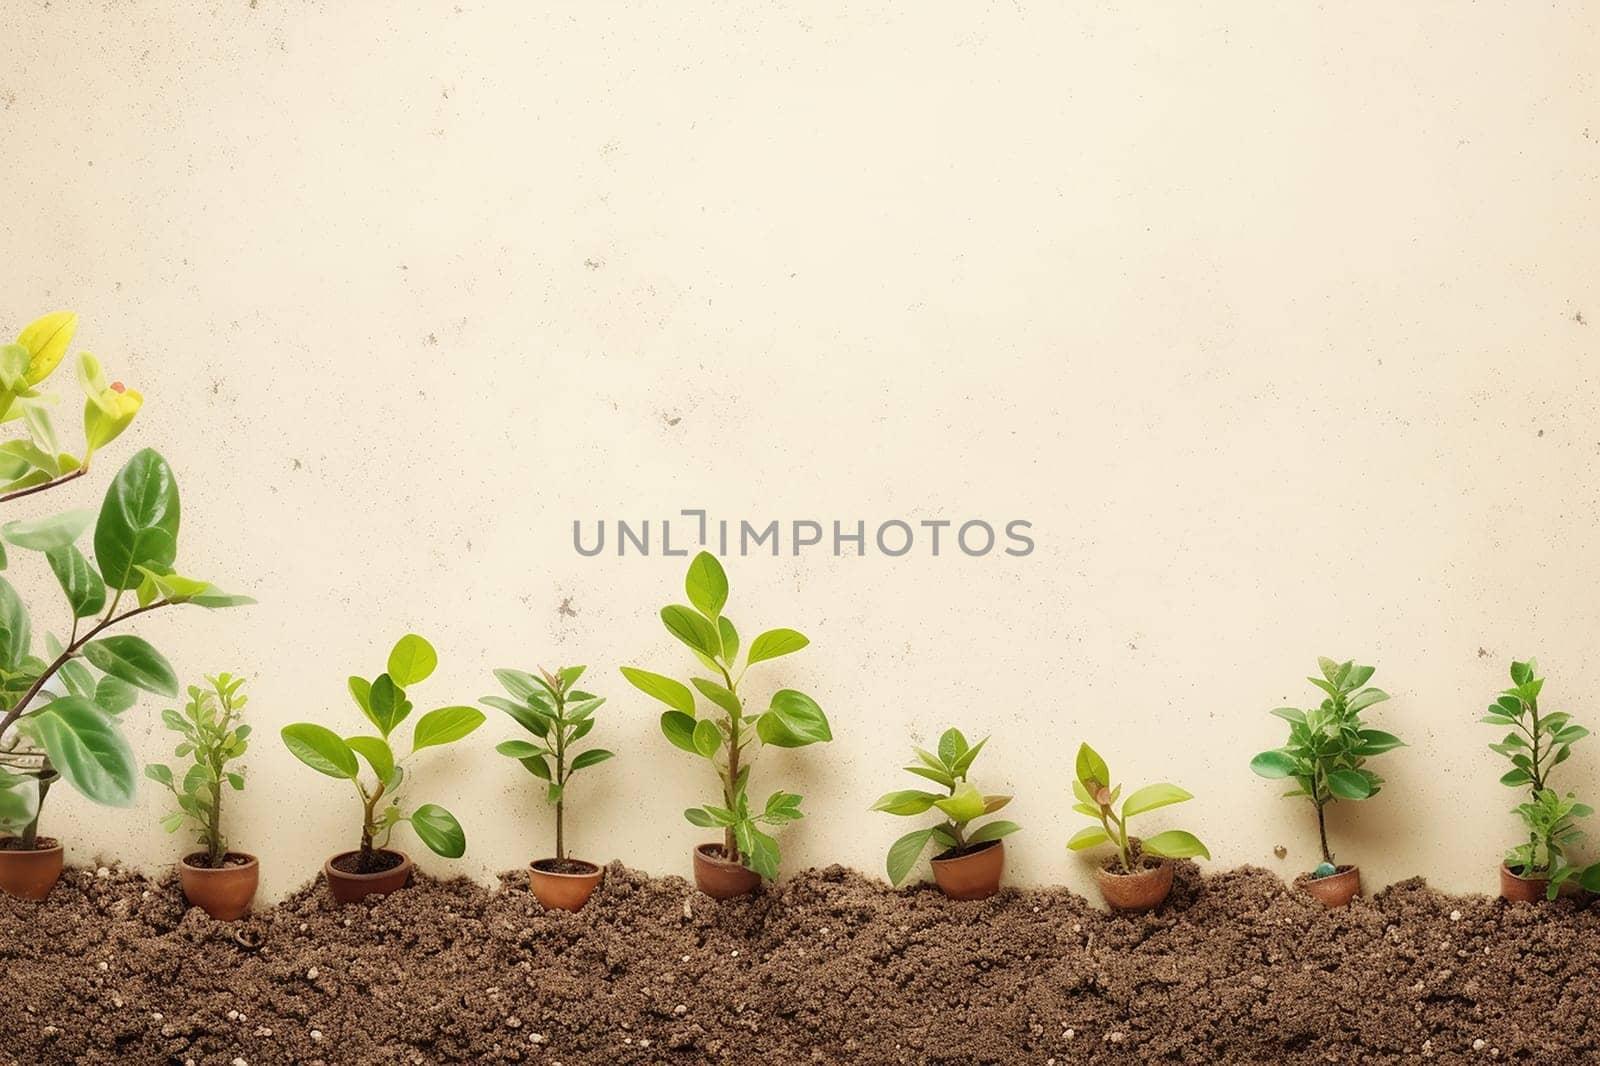 Gradual growth stages of plants in soil with a plain background.